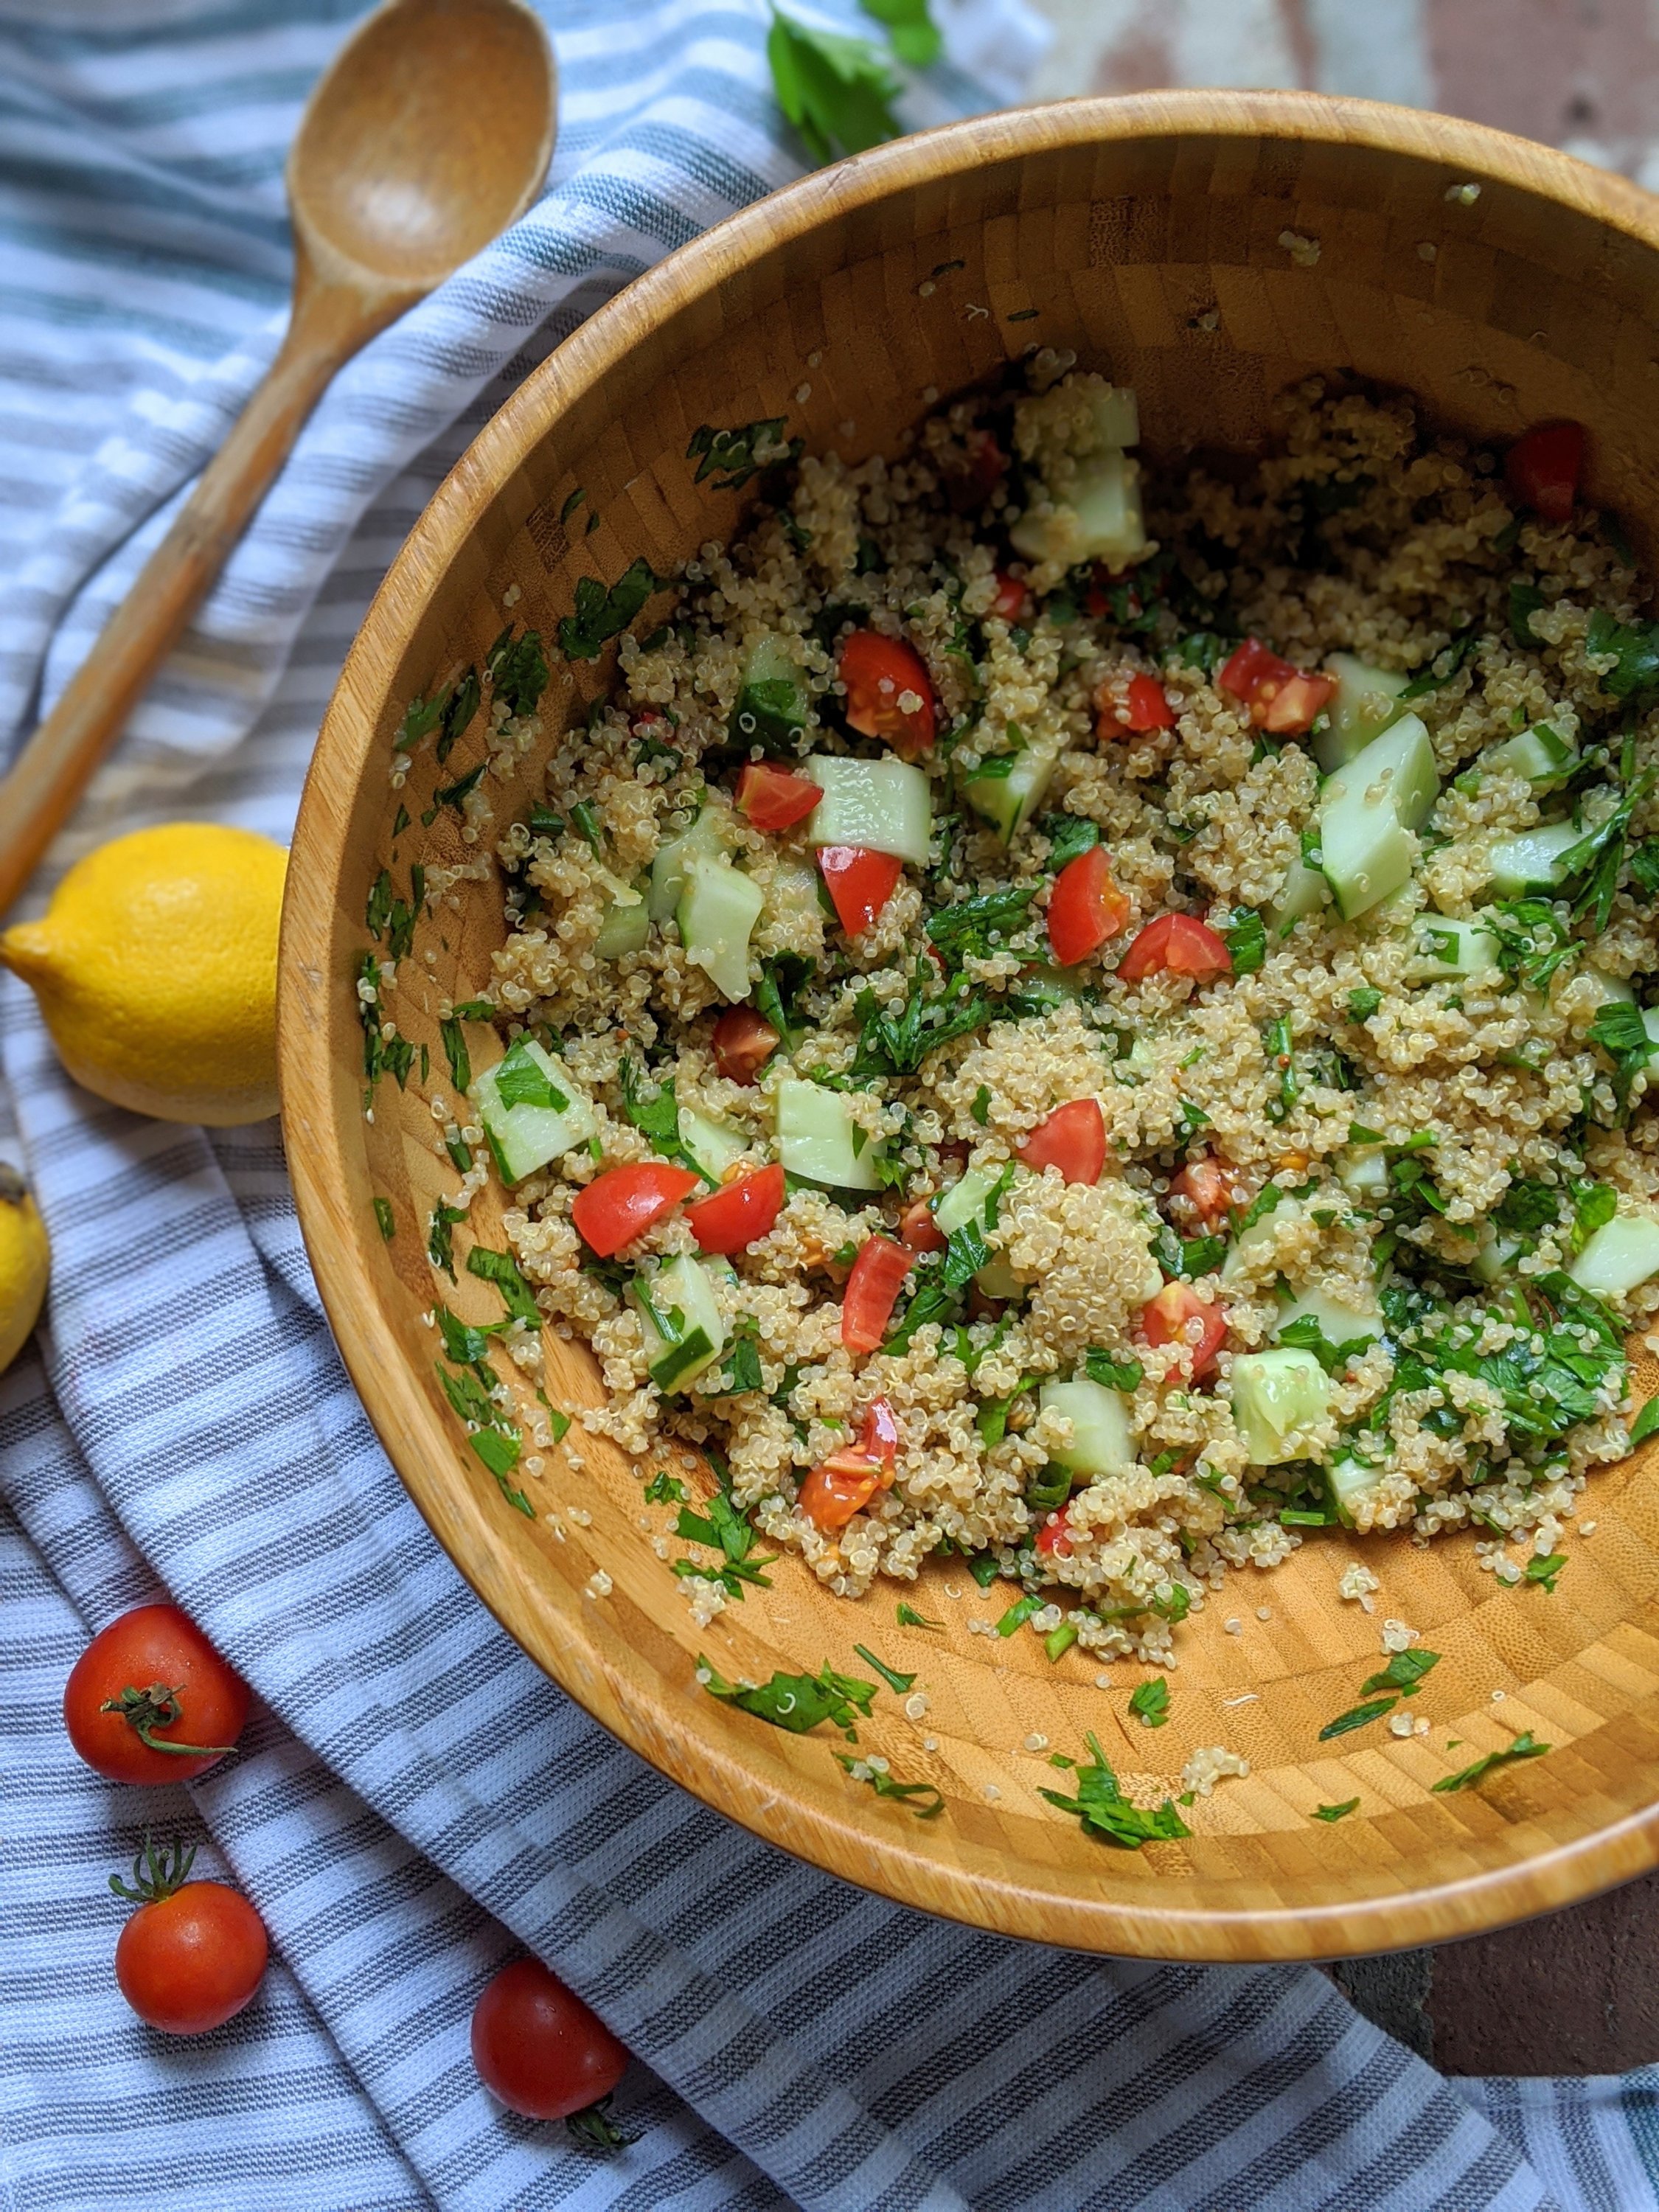 meatless summer side dish recipes quinoa salad vegan vegetarian gluten free with cucumber tomatoes and parsley healthy mediterranean diet salads high protein vegetarian recipes